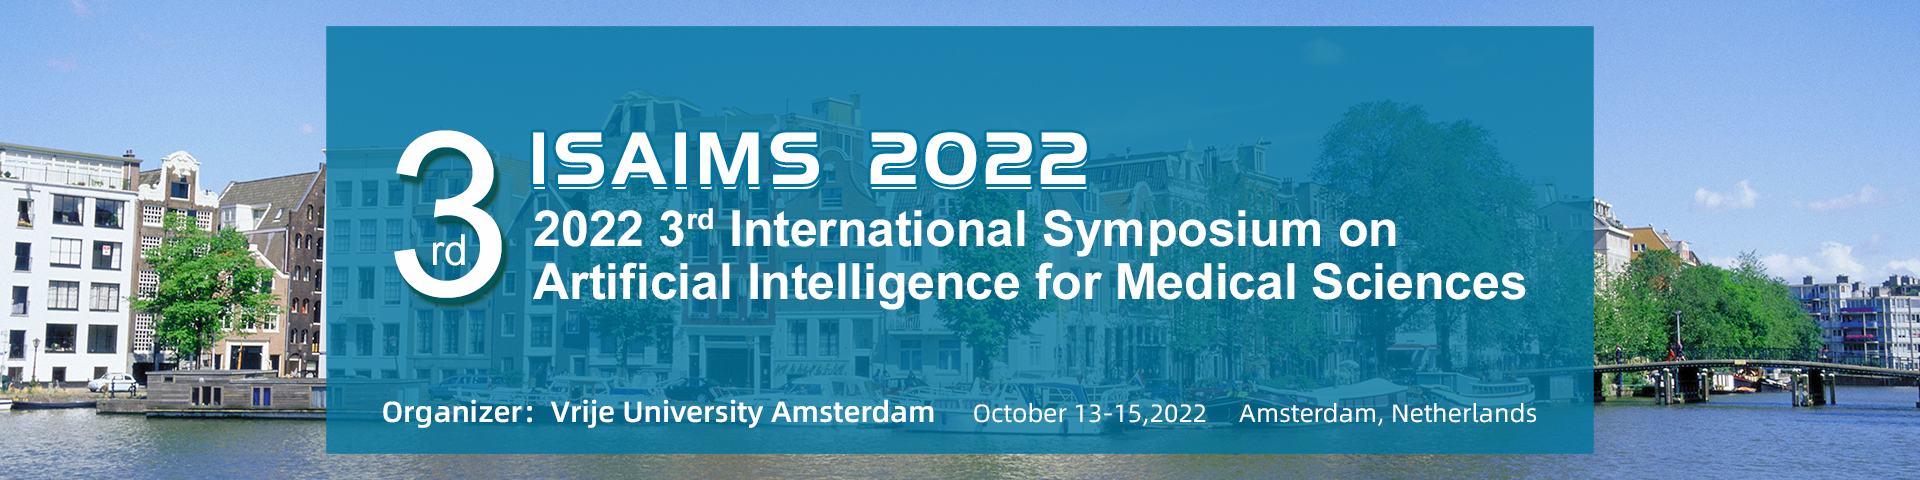 2022 3rd International Symposium on Artificial Intelligence for Medical Sciences (ISAIMS 2022)